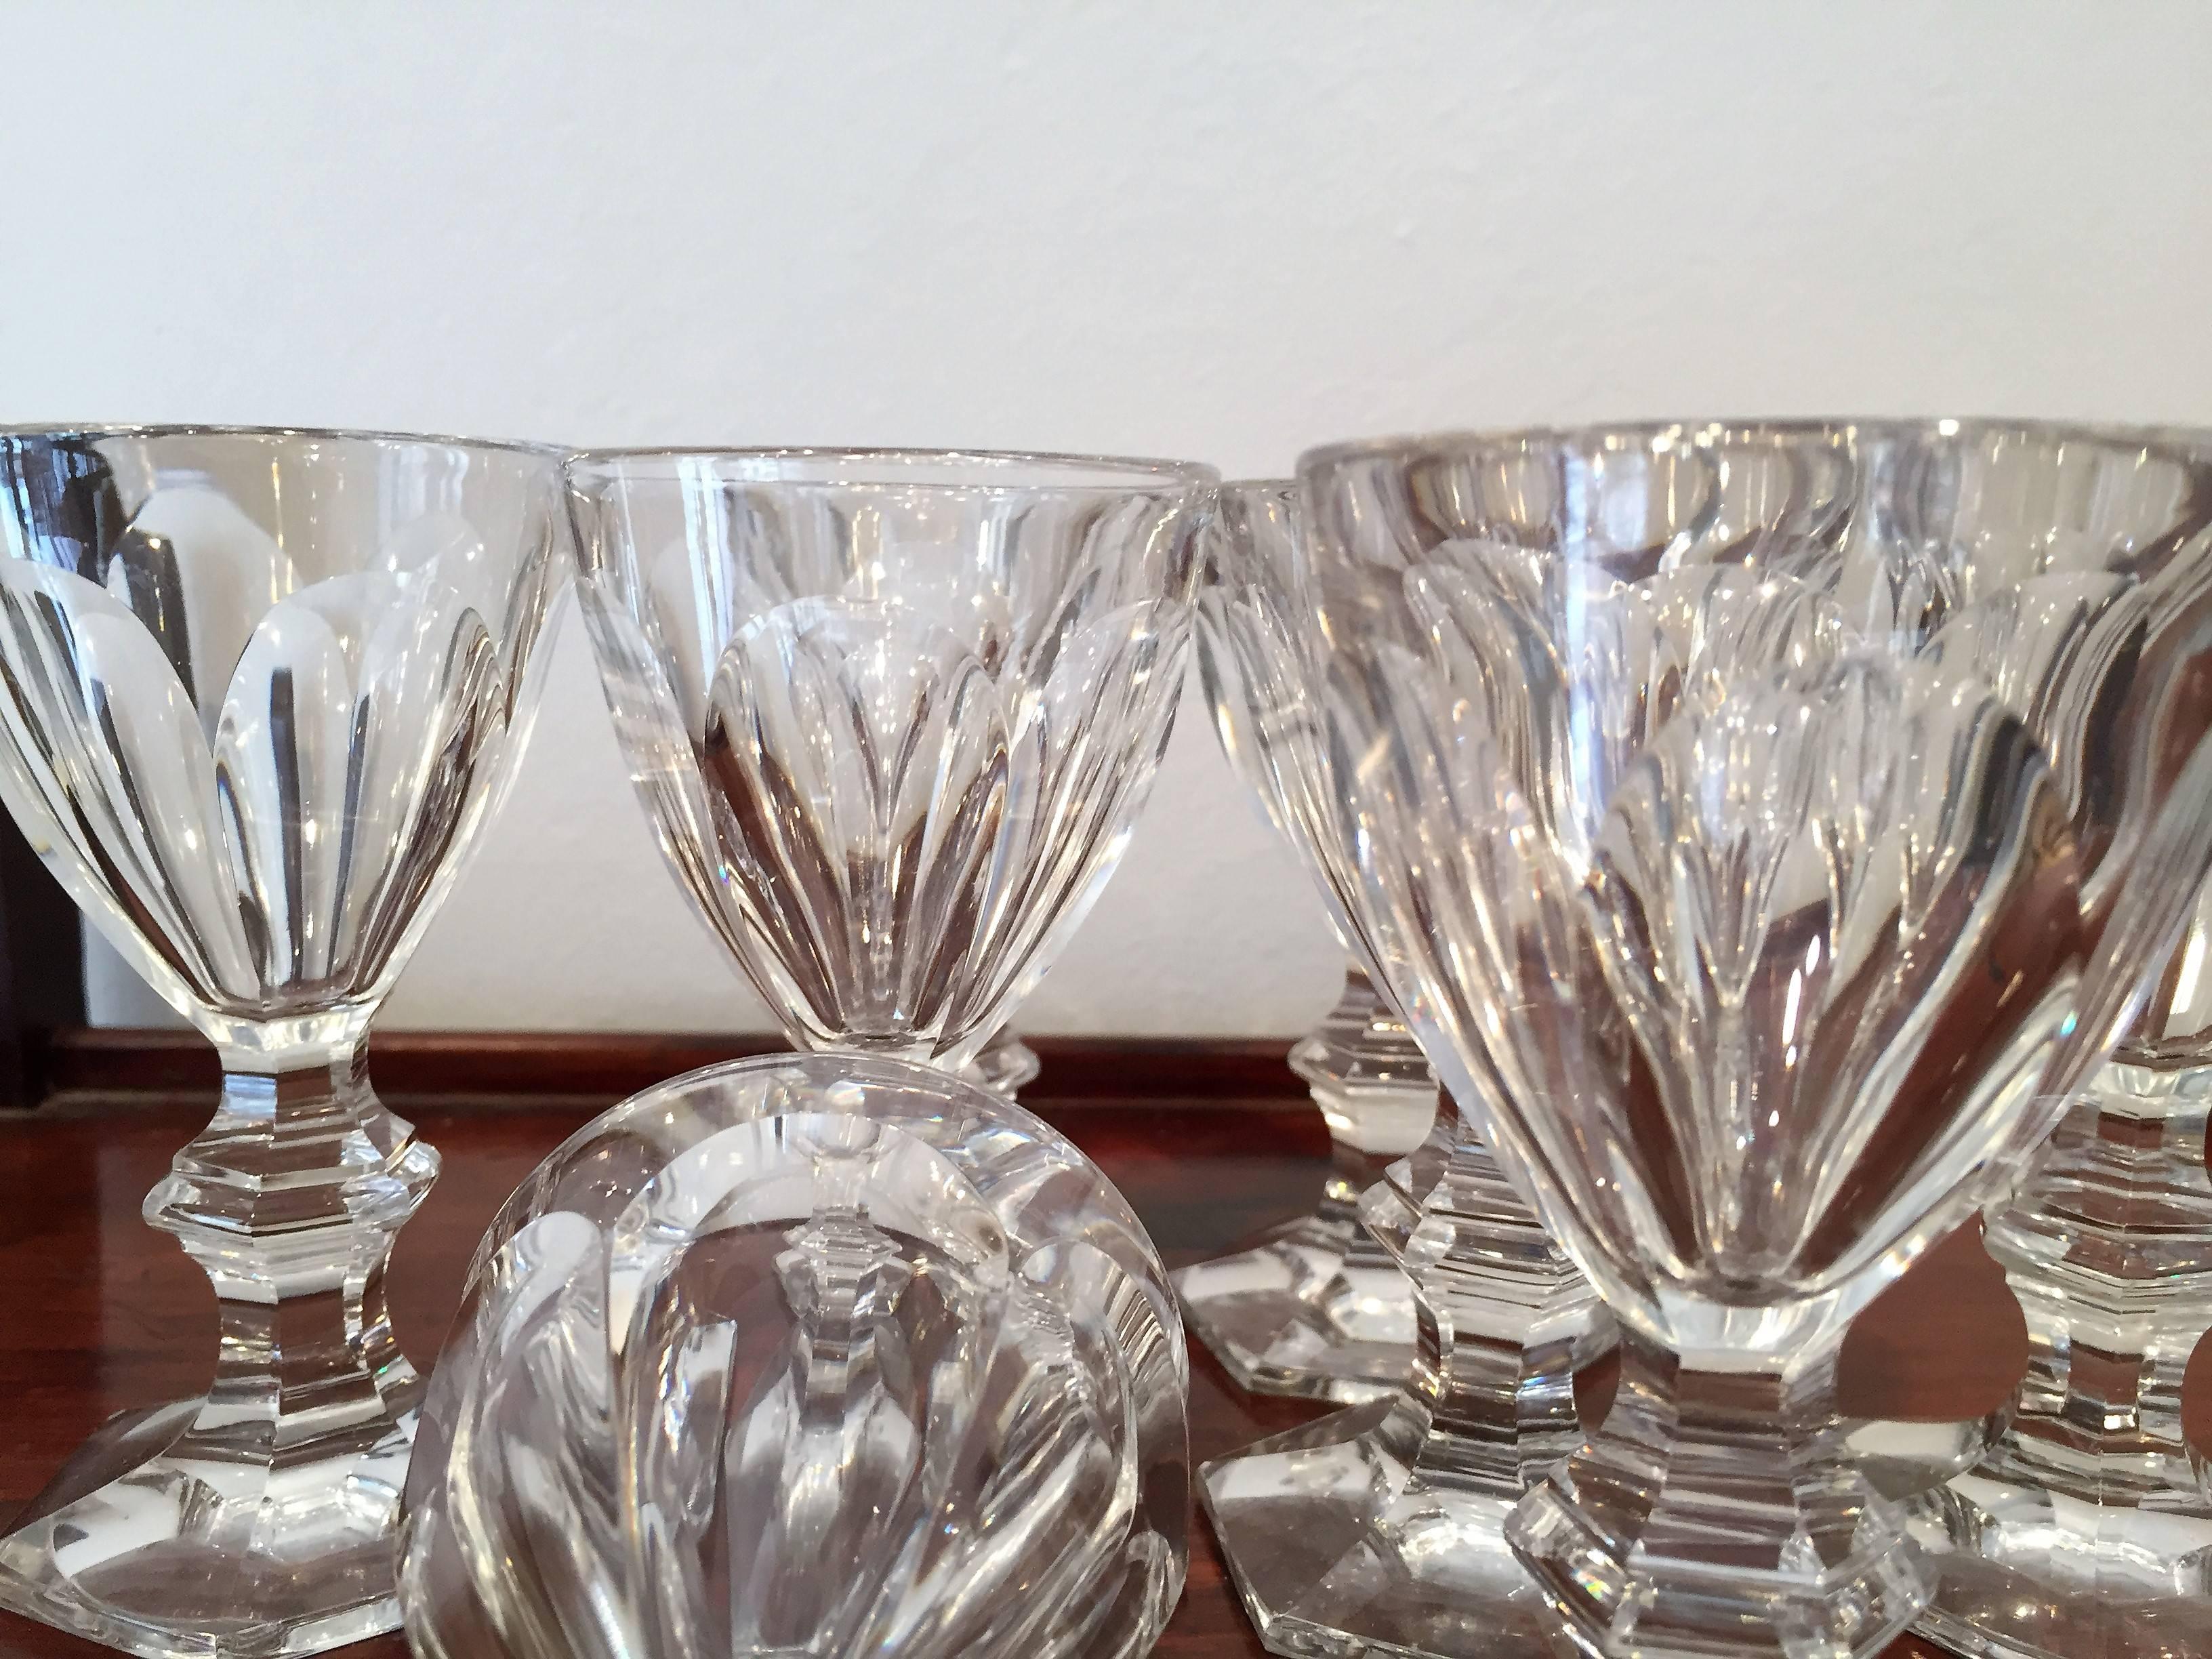 Set of eight glasses Baccarat Harcourt (no marks before 1937)
Probably for Porto wine.